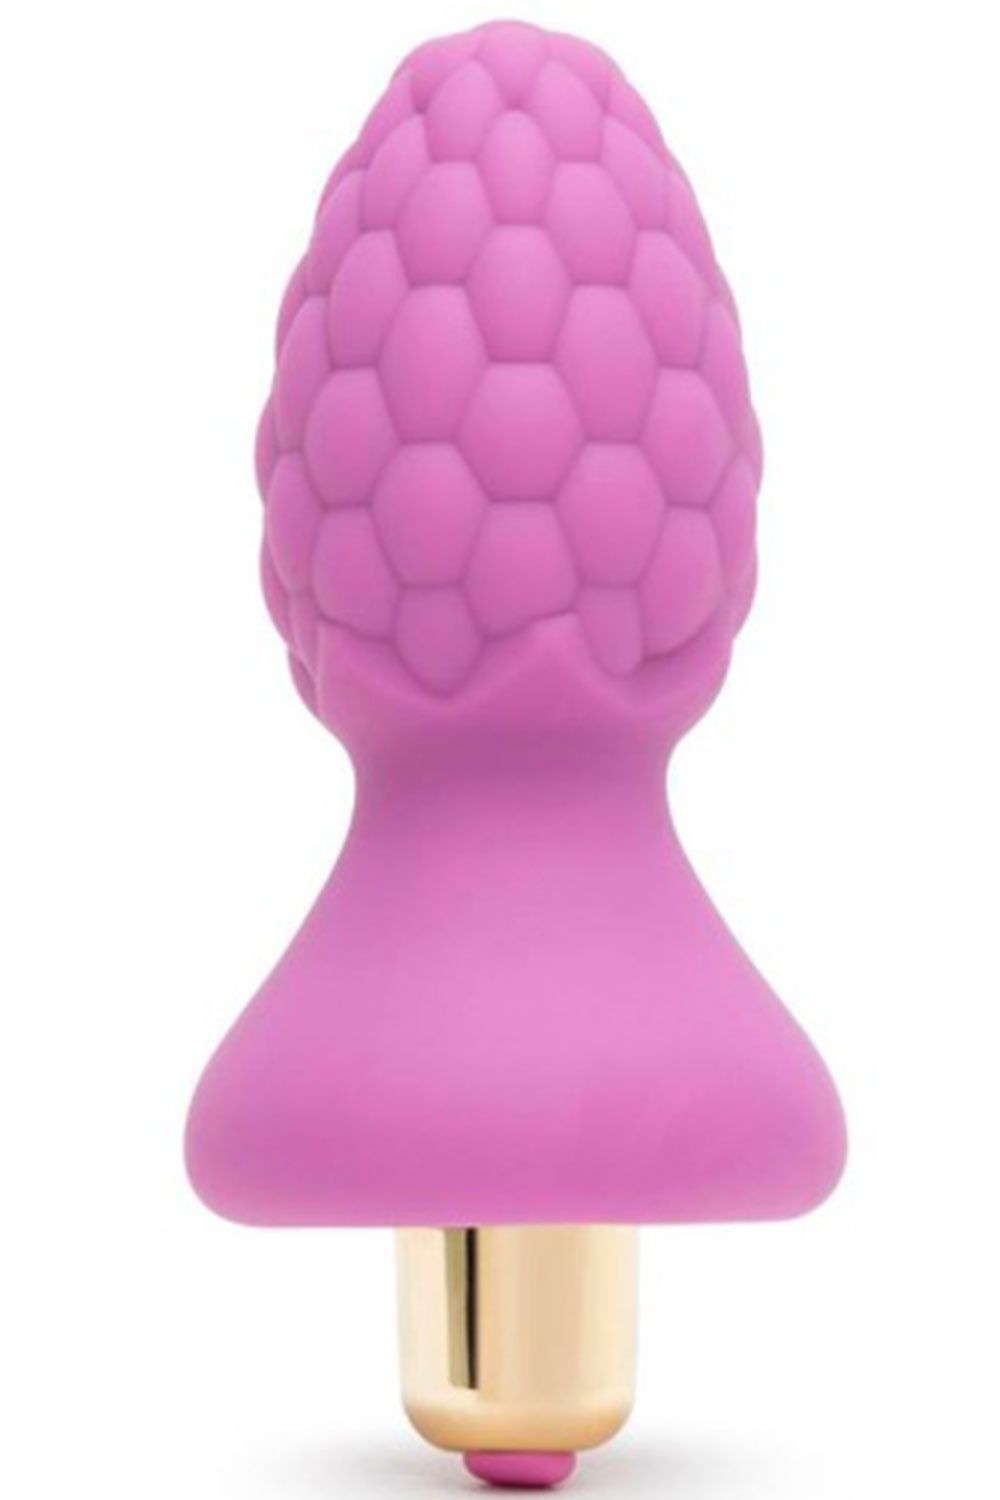 Very nice toys for masturbation and anal sex